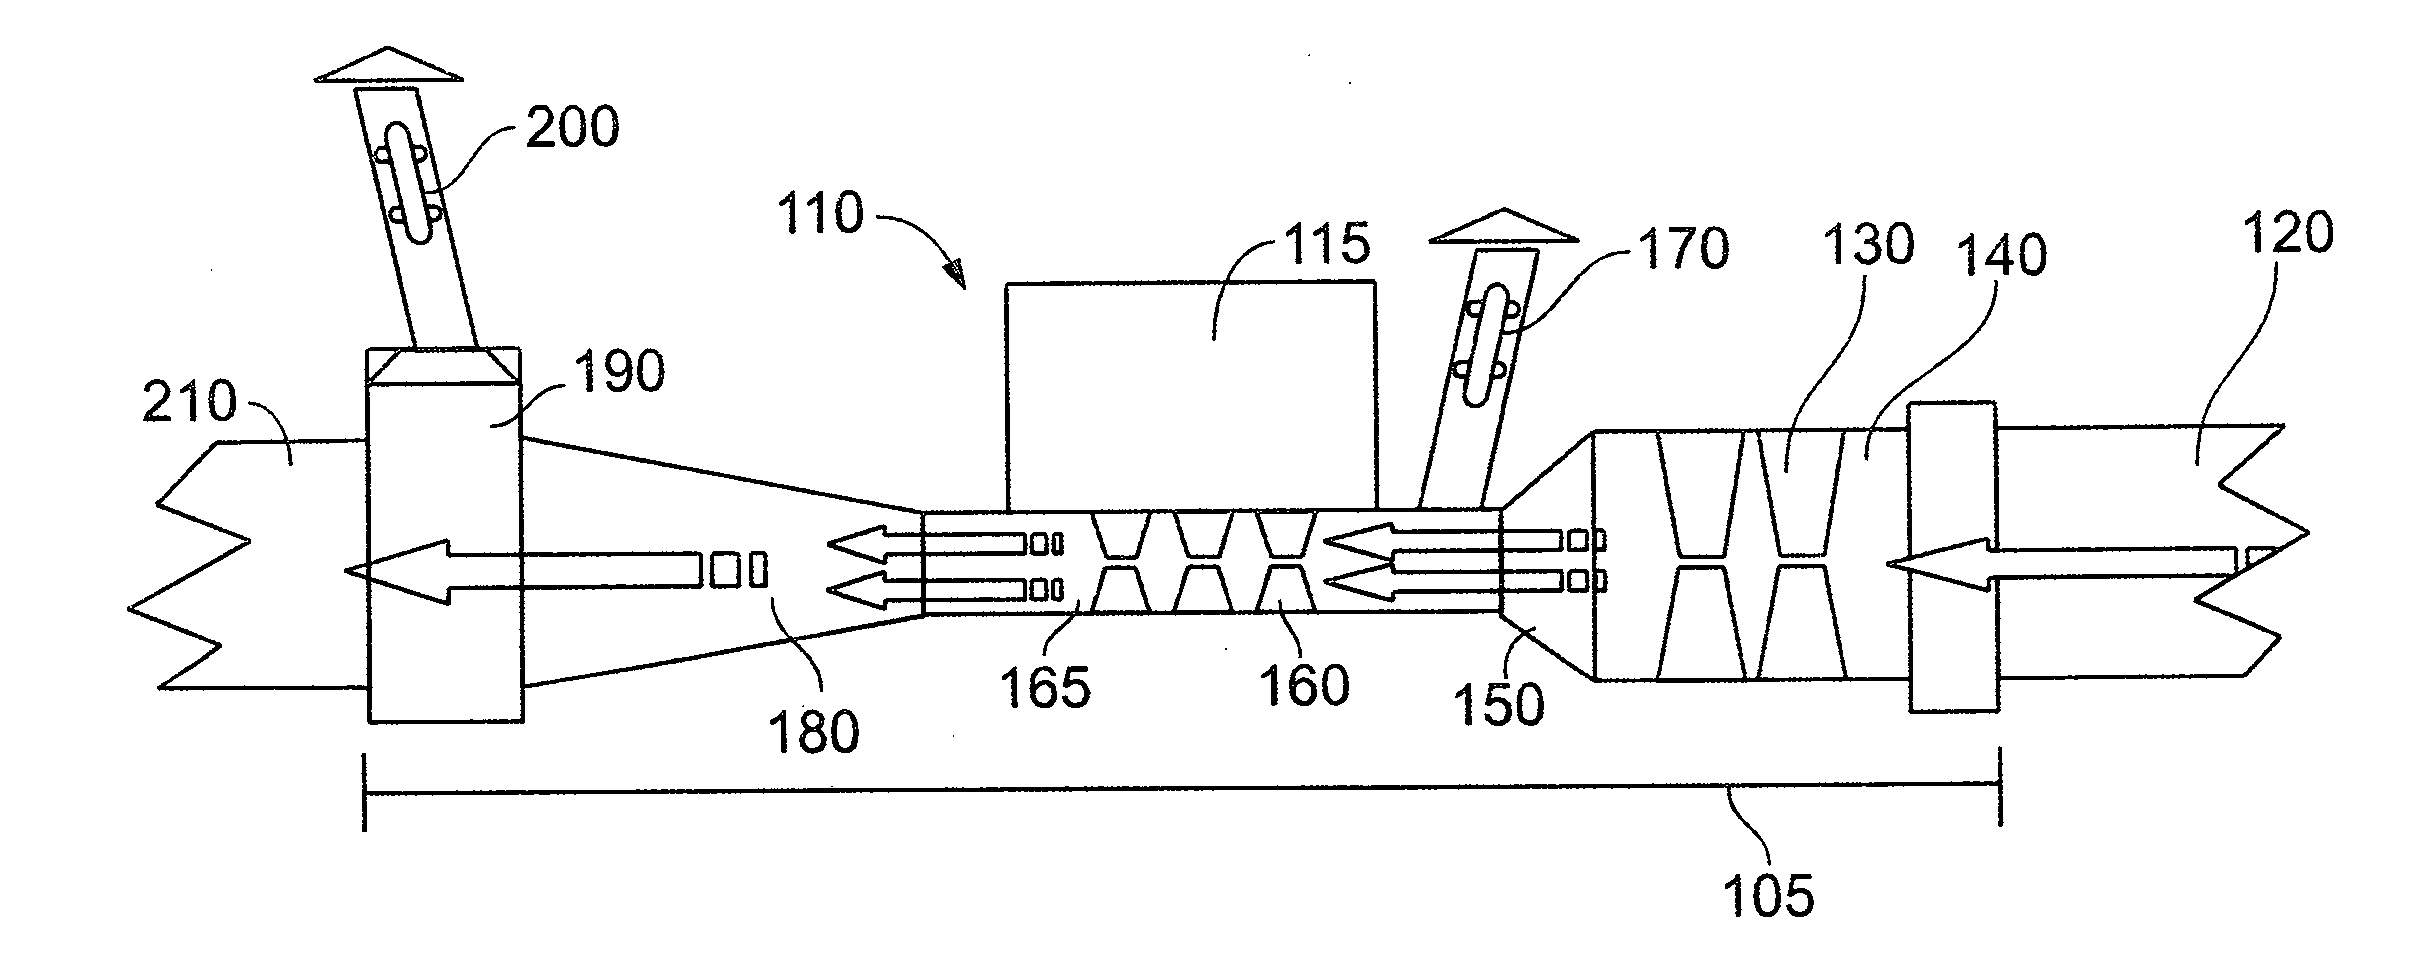 Flow-based energy transport and generation device